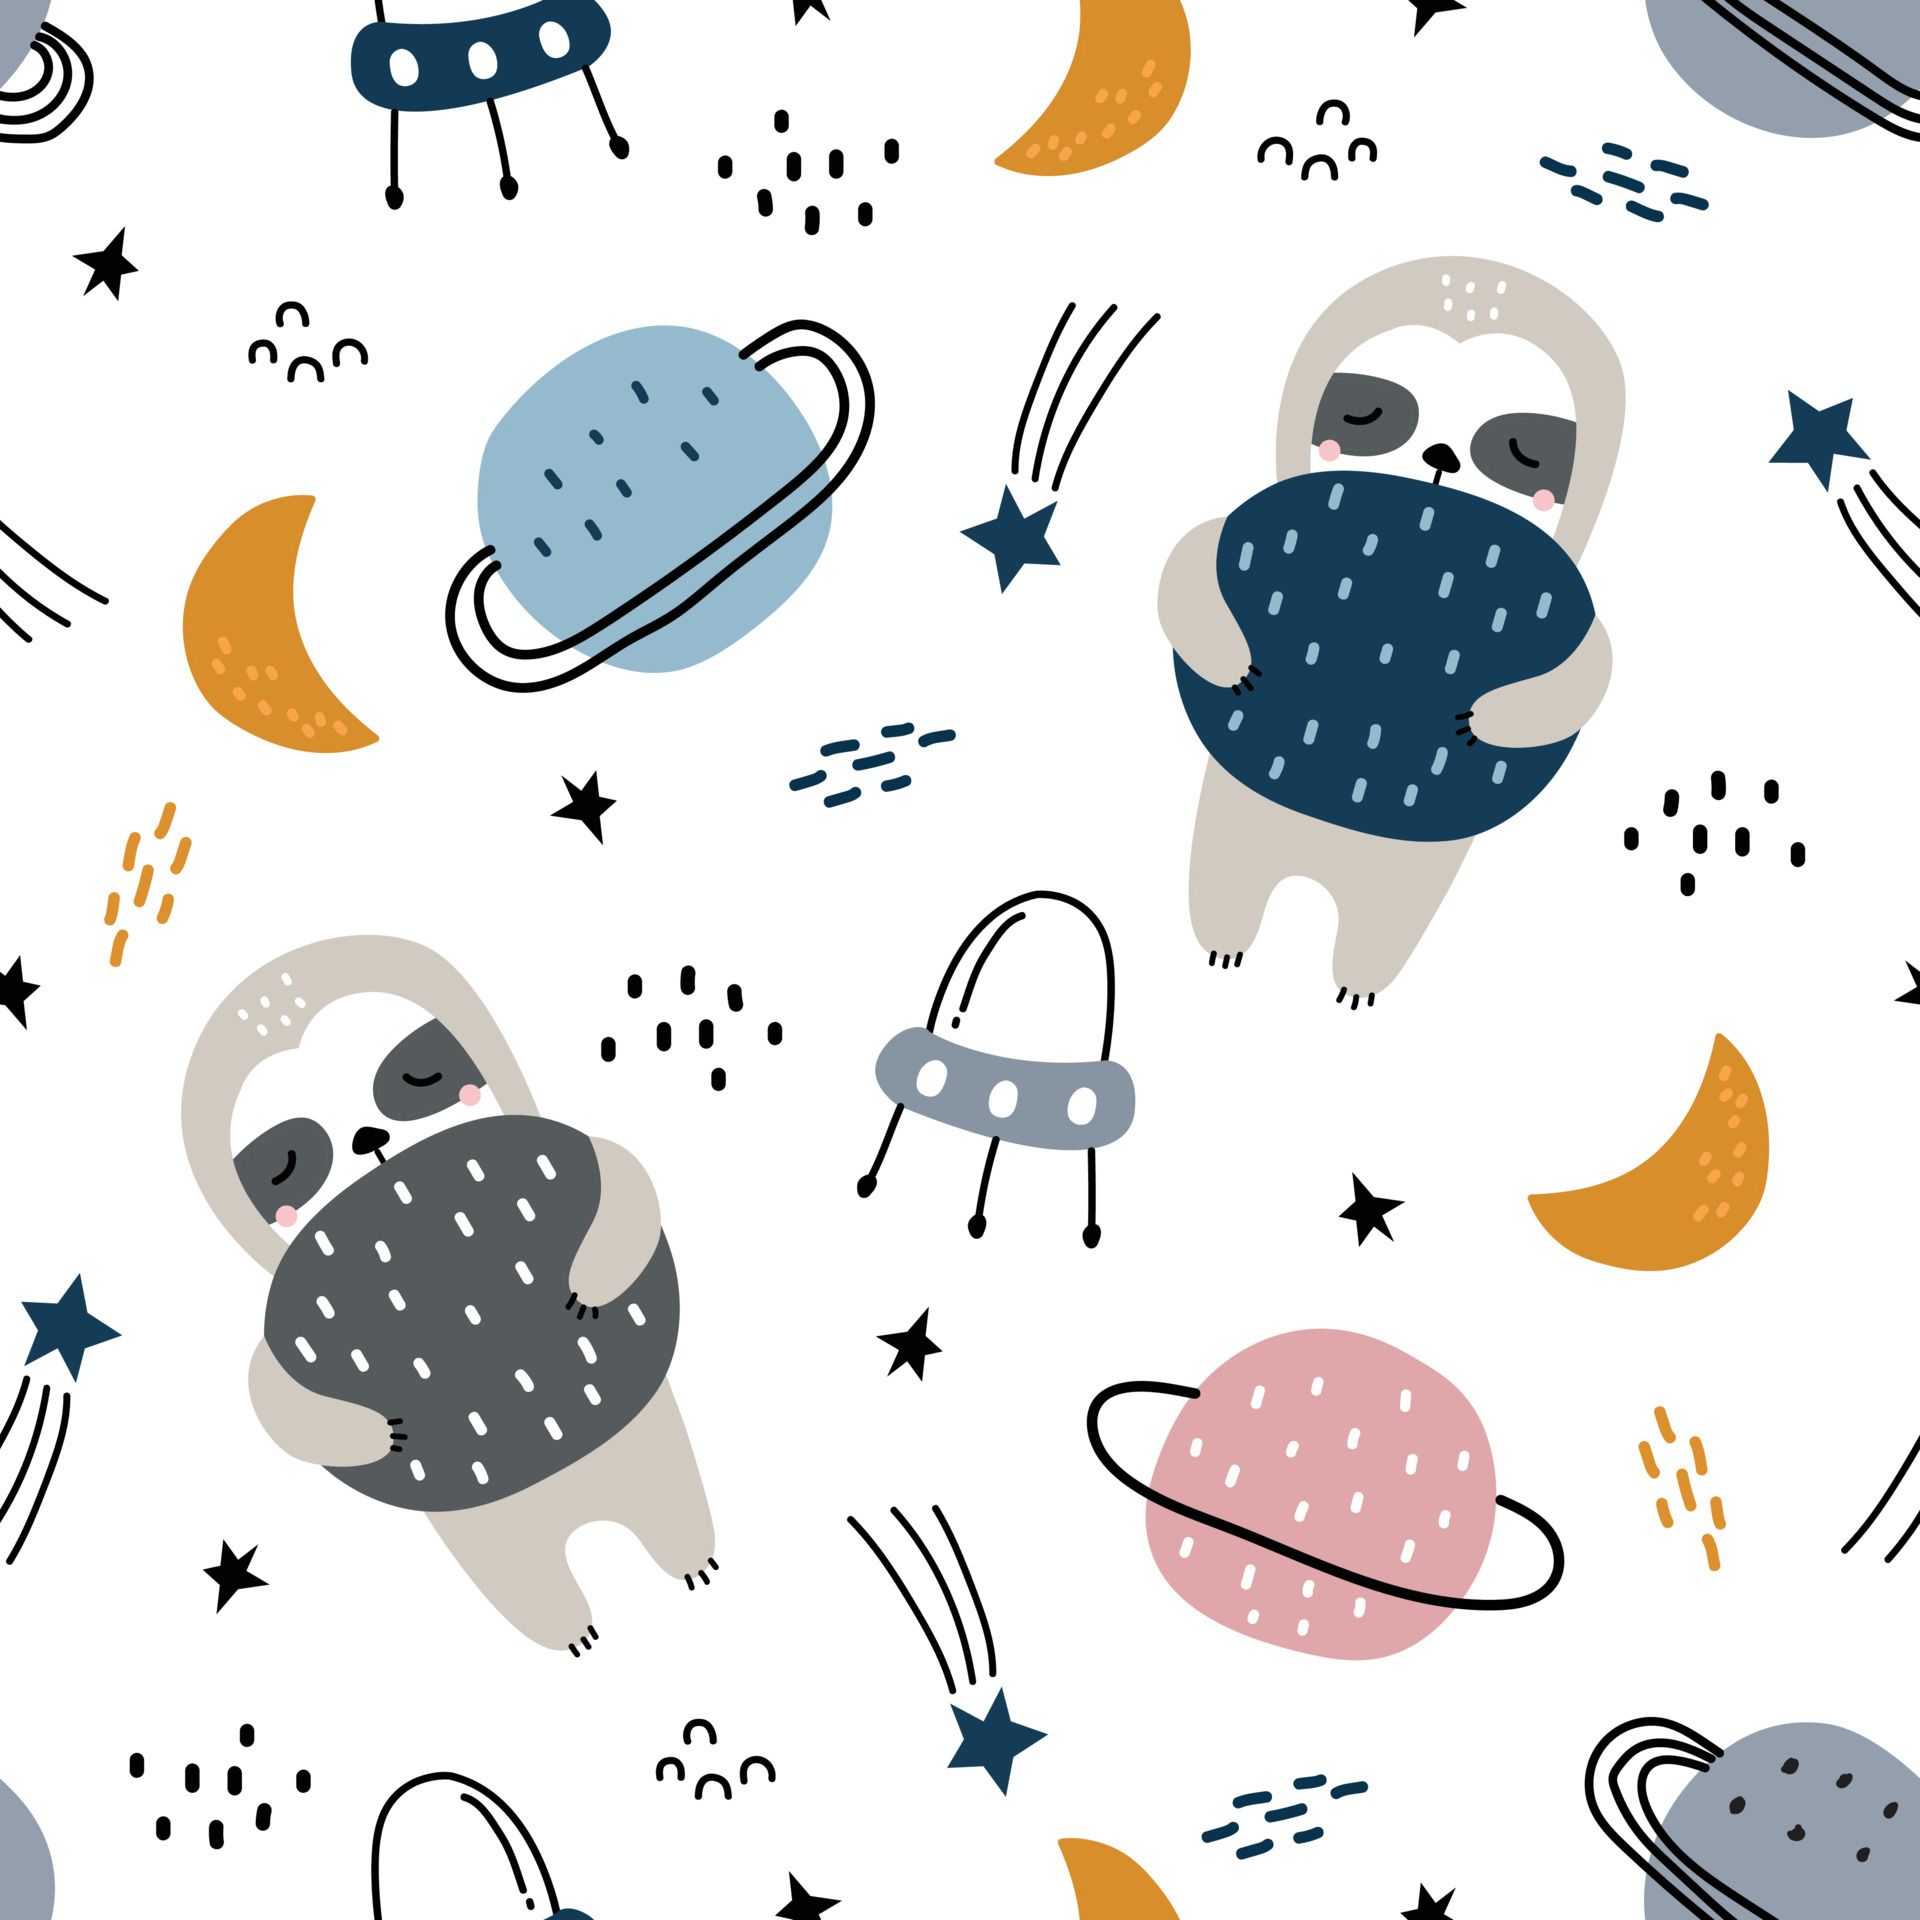 A space-themed pattern with sloths, planets, and stars - Sloth